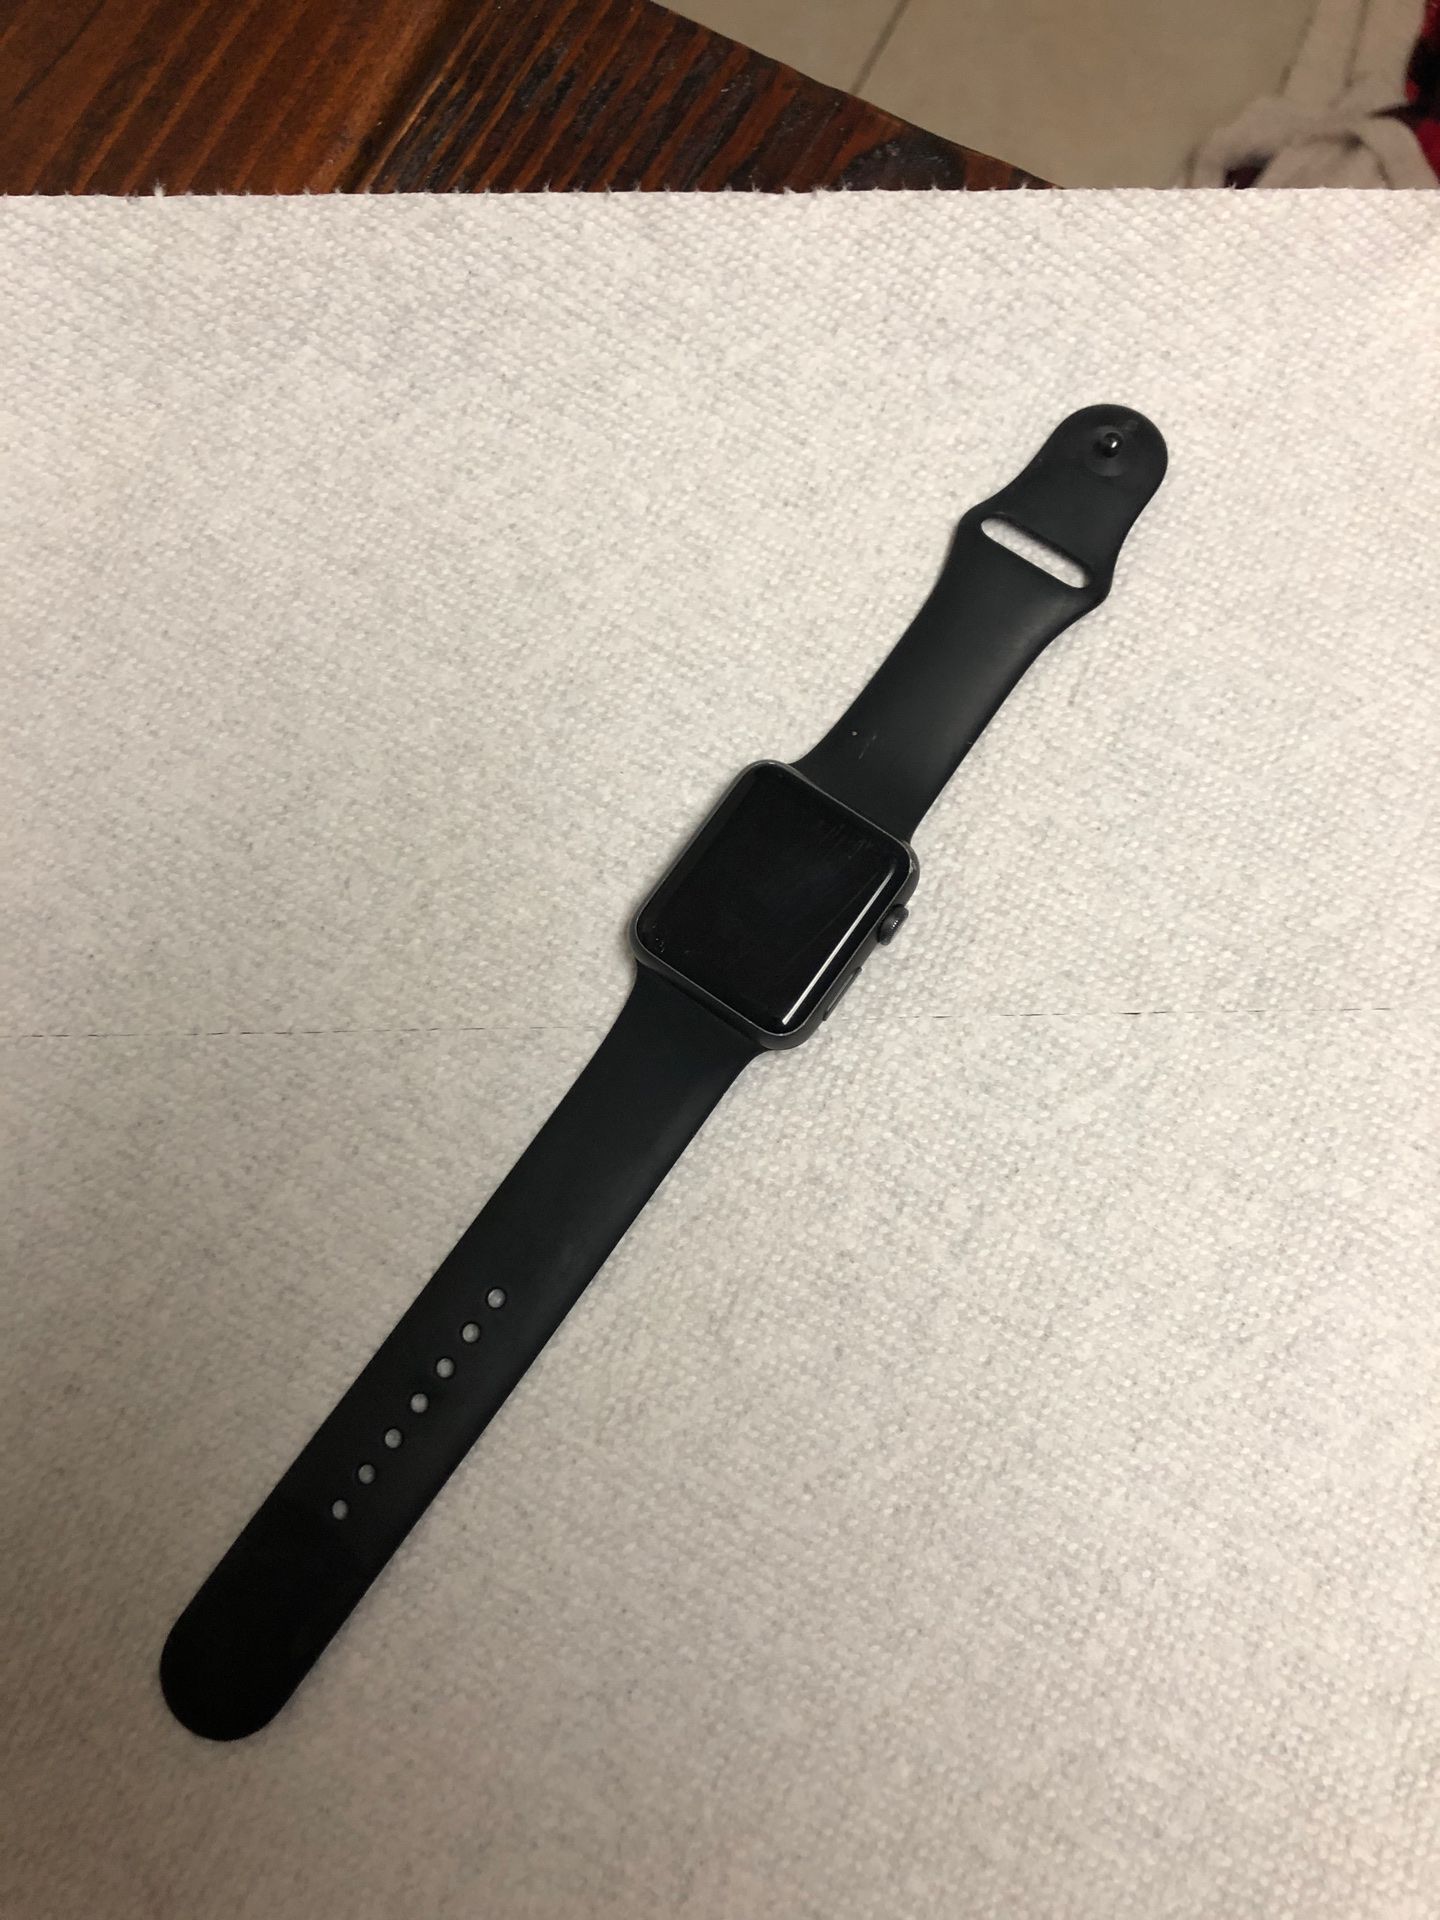 Apple Watch Series 1 | Size 42mm no charger